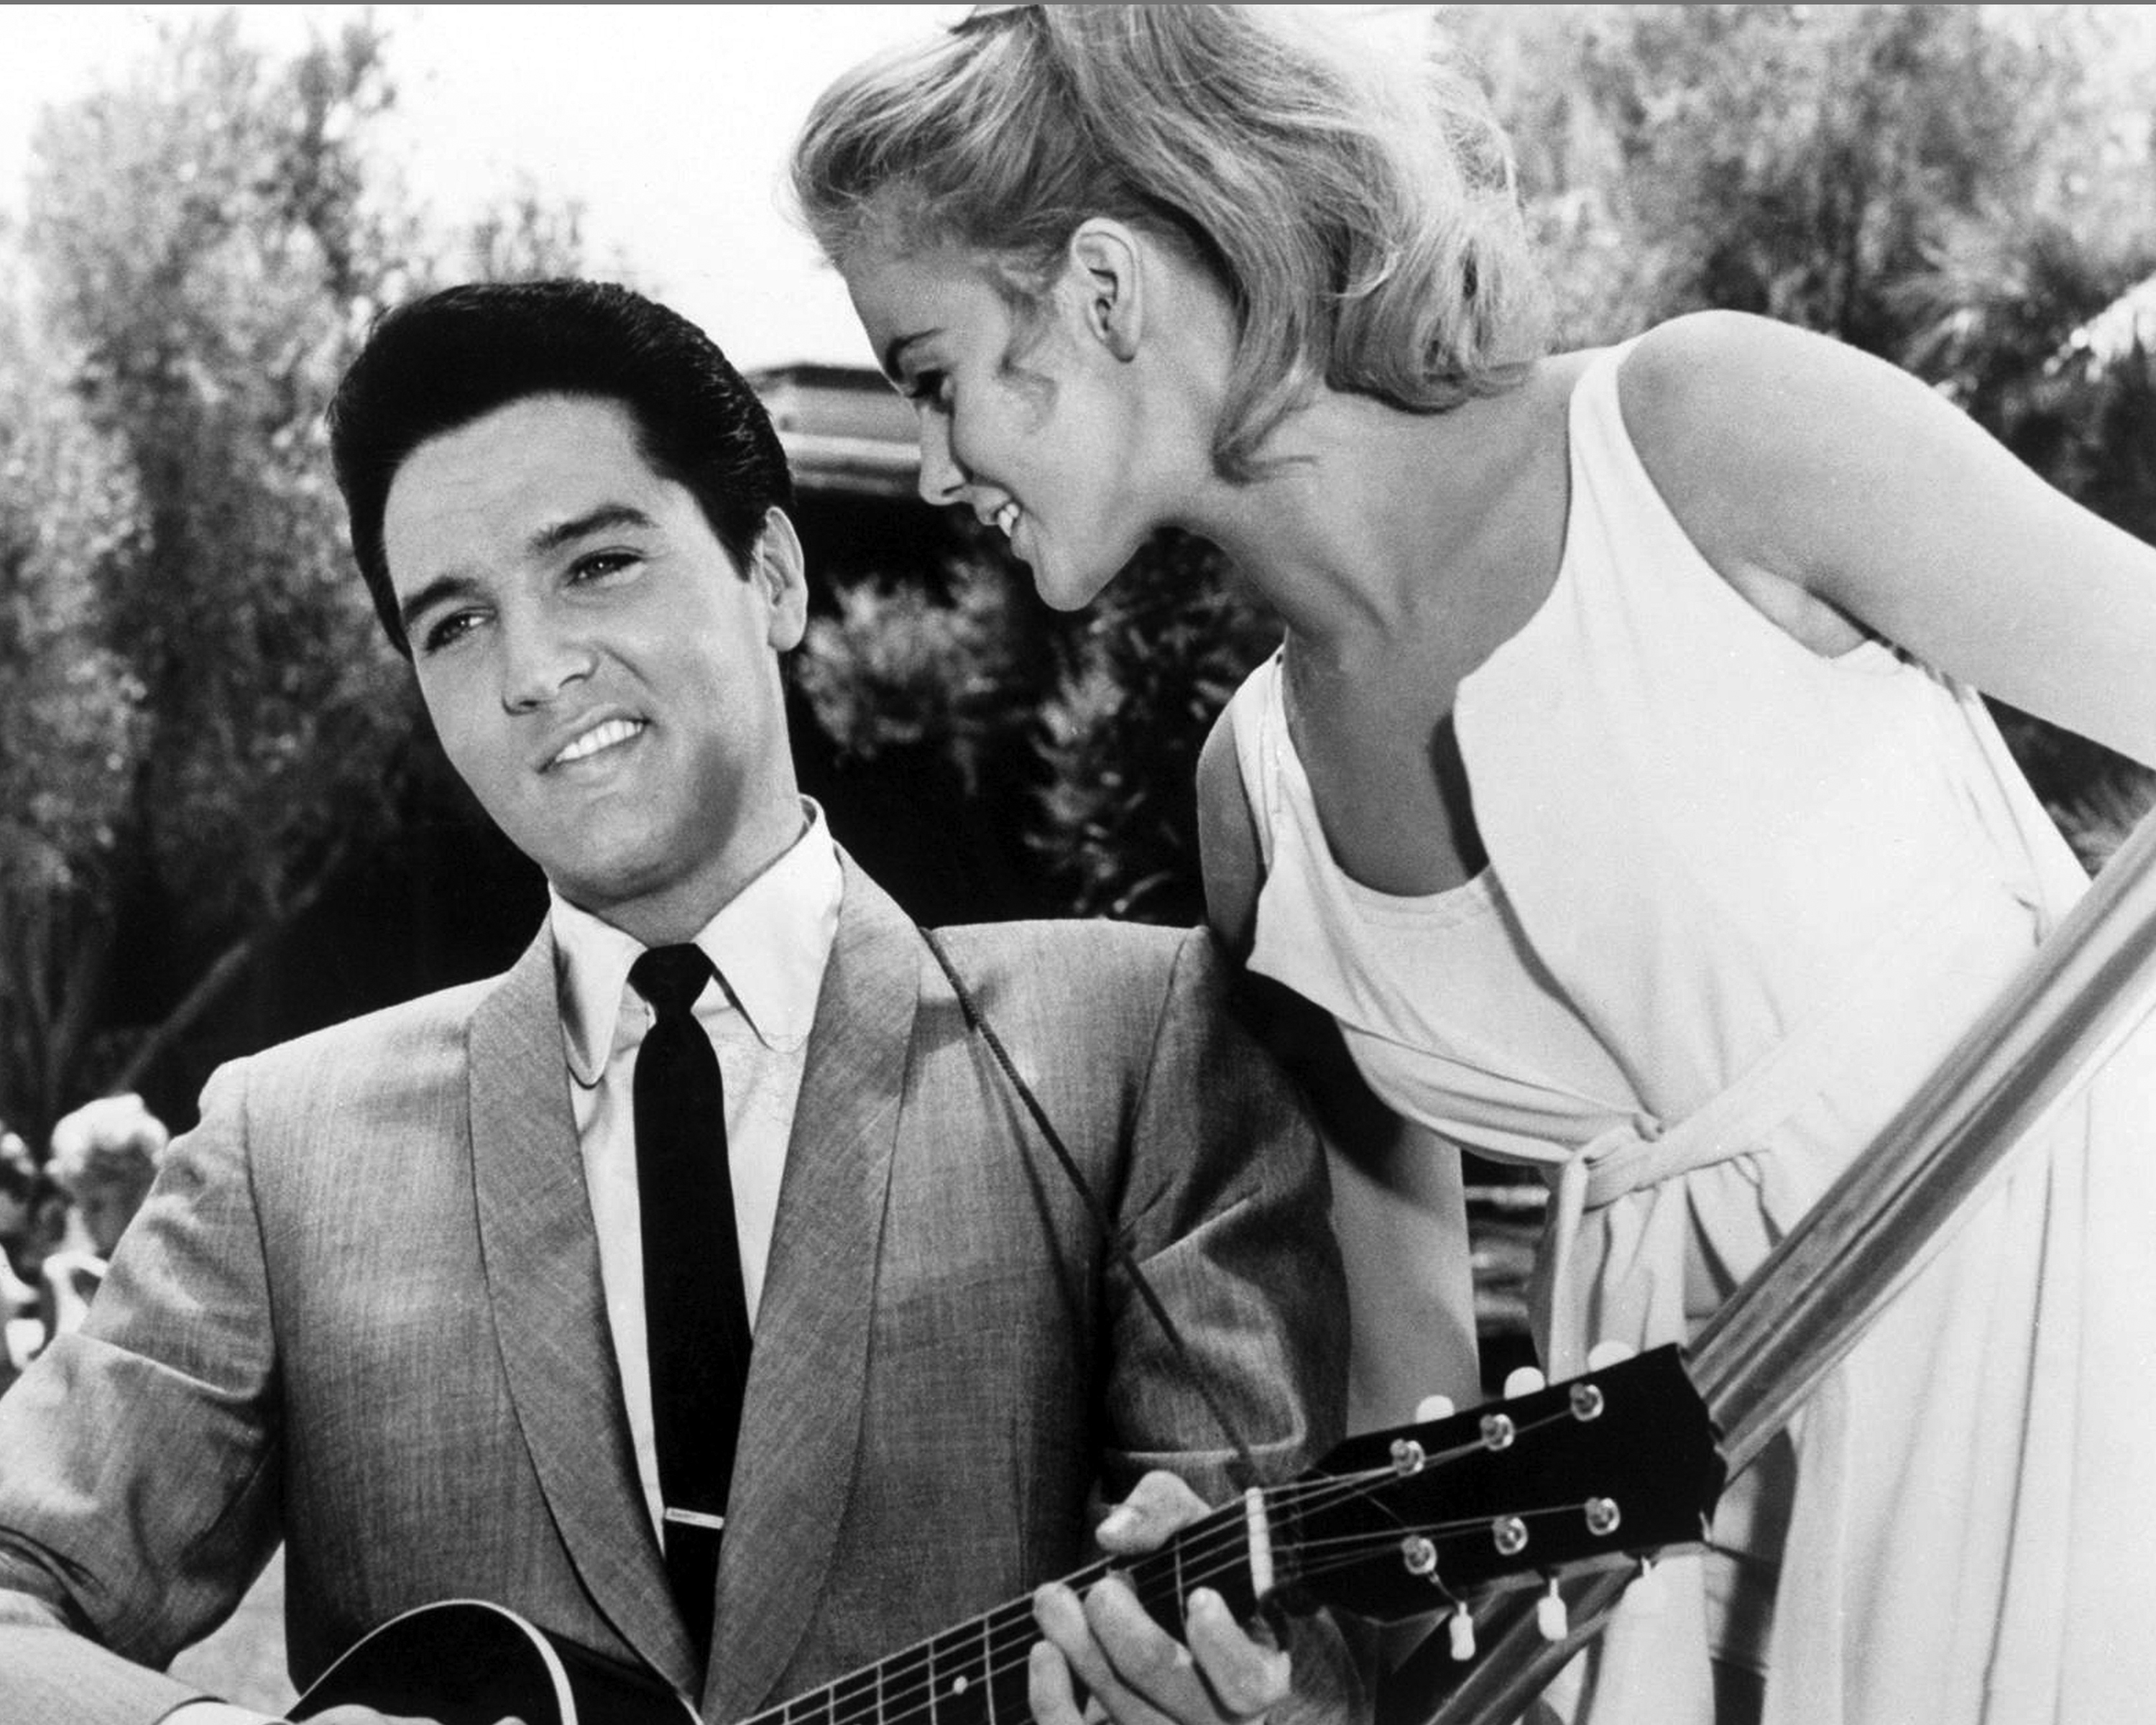 Elvis Presley with a guitar standing next to Ann-Margret